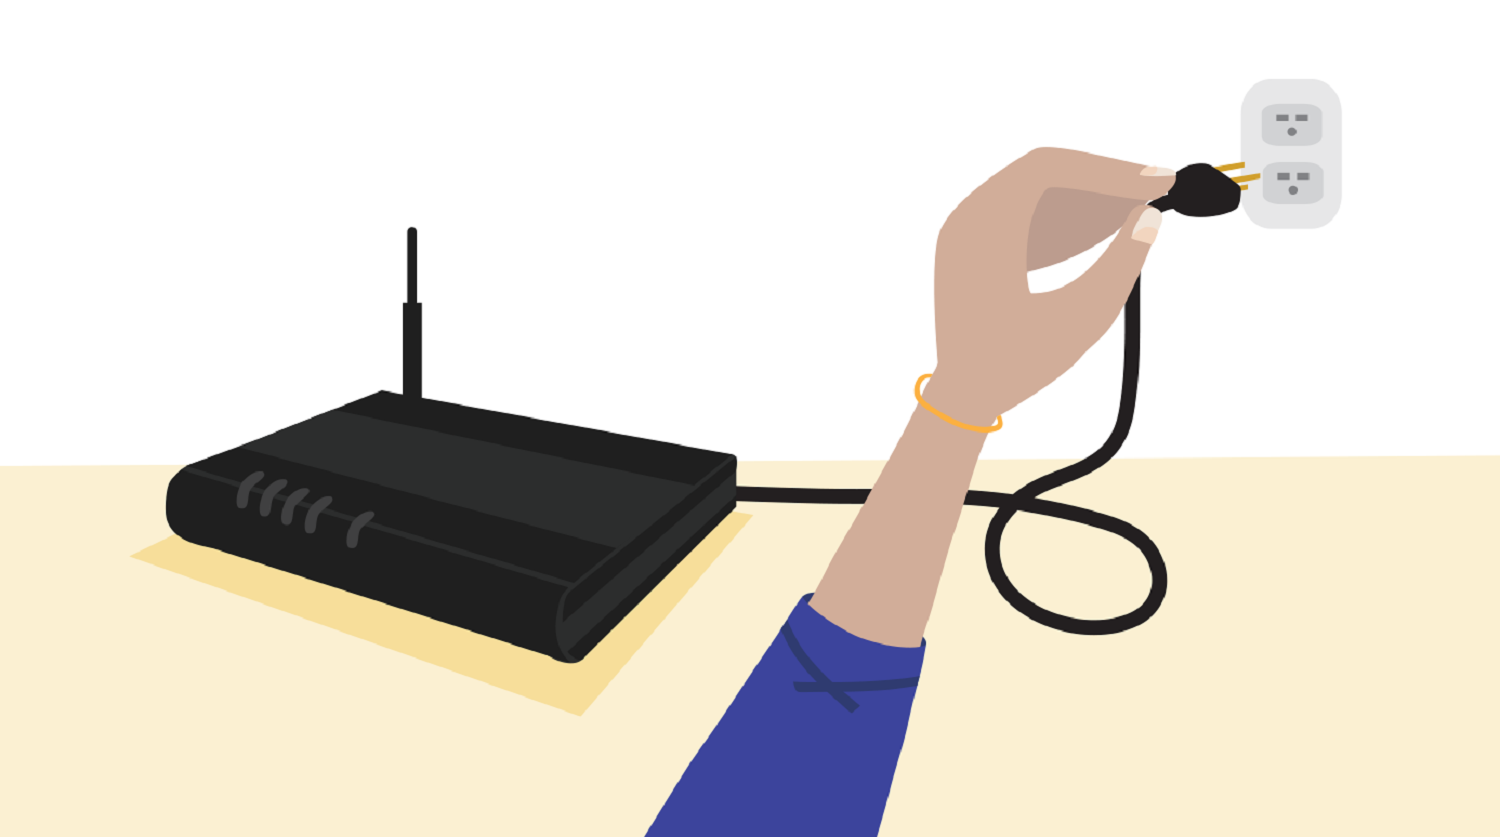 unplug modem and router